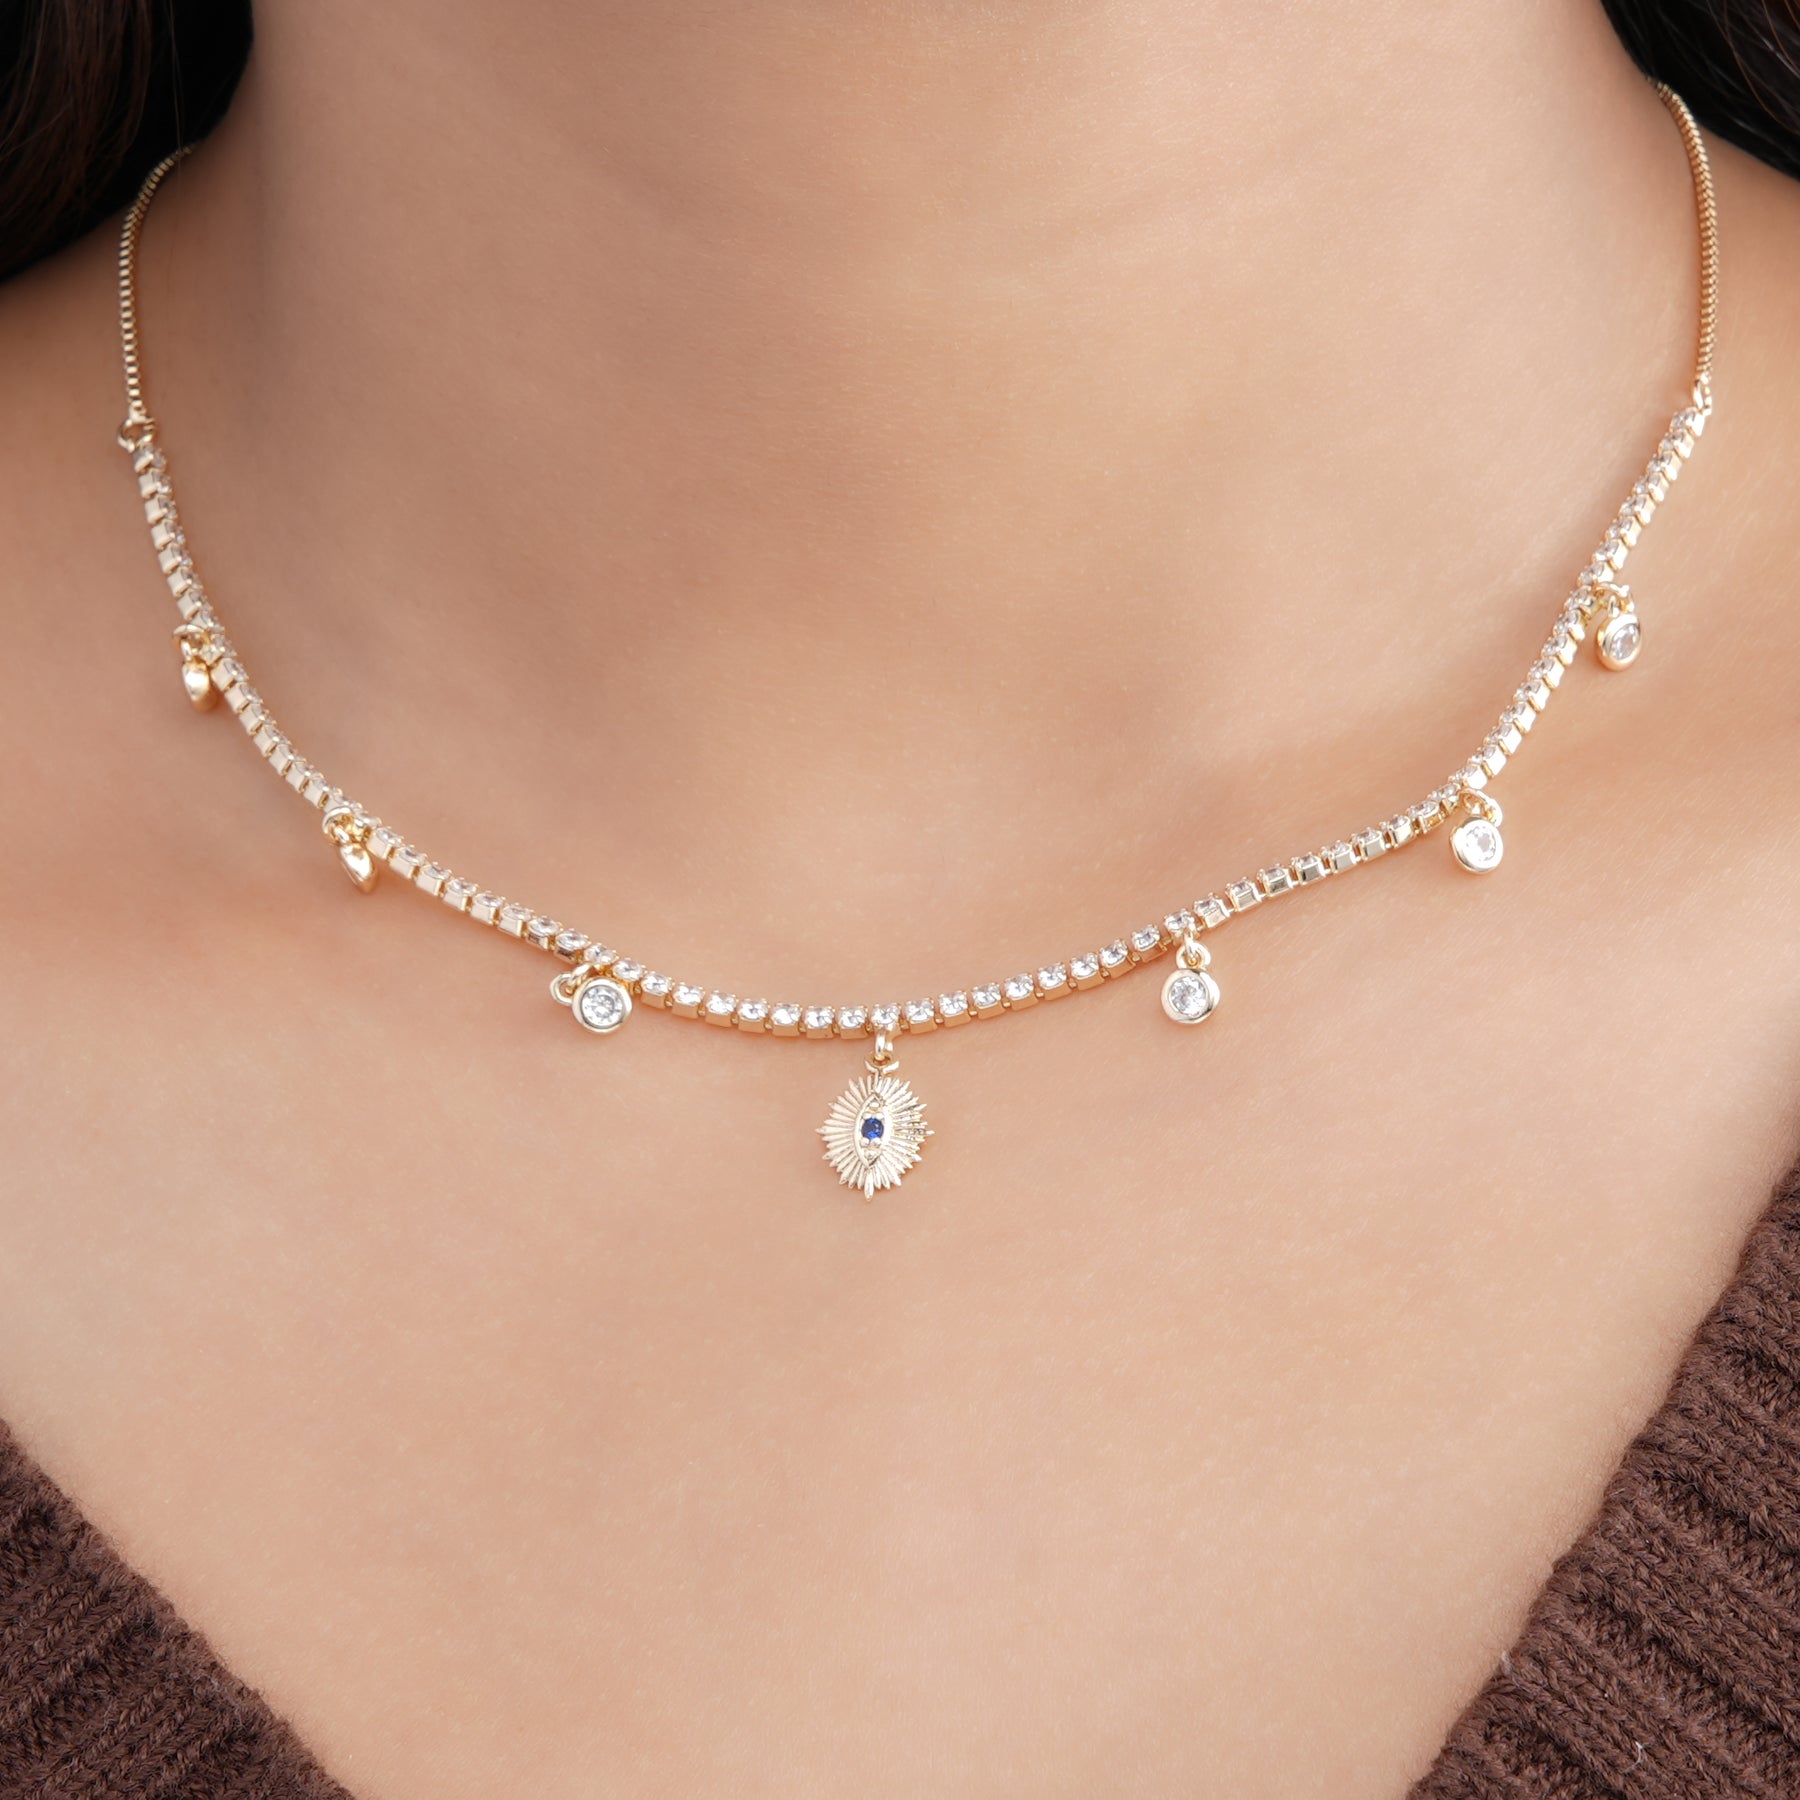 Korean Diamond Pearl Splicing Pearl Choker Necklace Simple And Elegant  Fashion Jewelry For Women From Efwmz, $32.62 | DHgate.Com